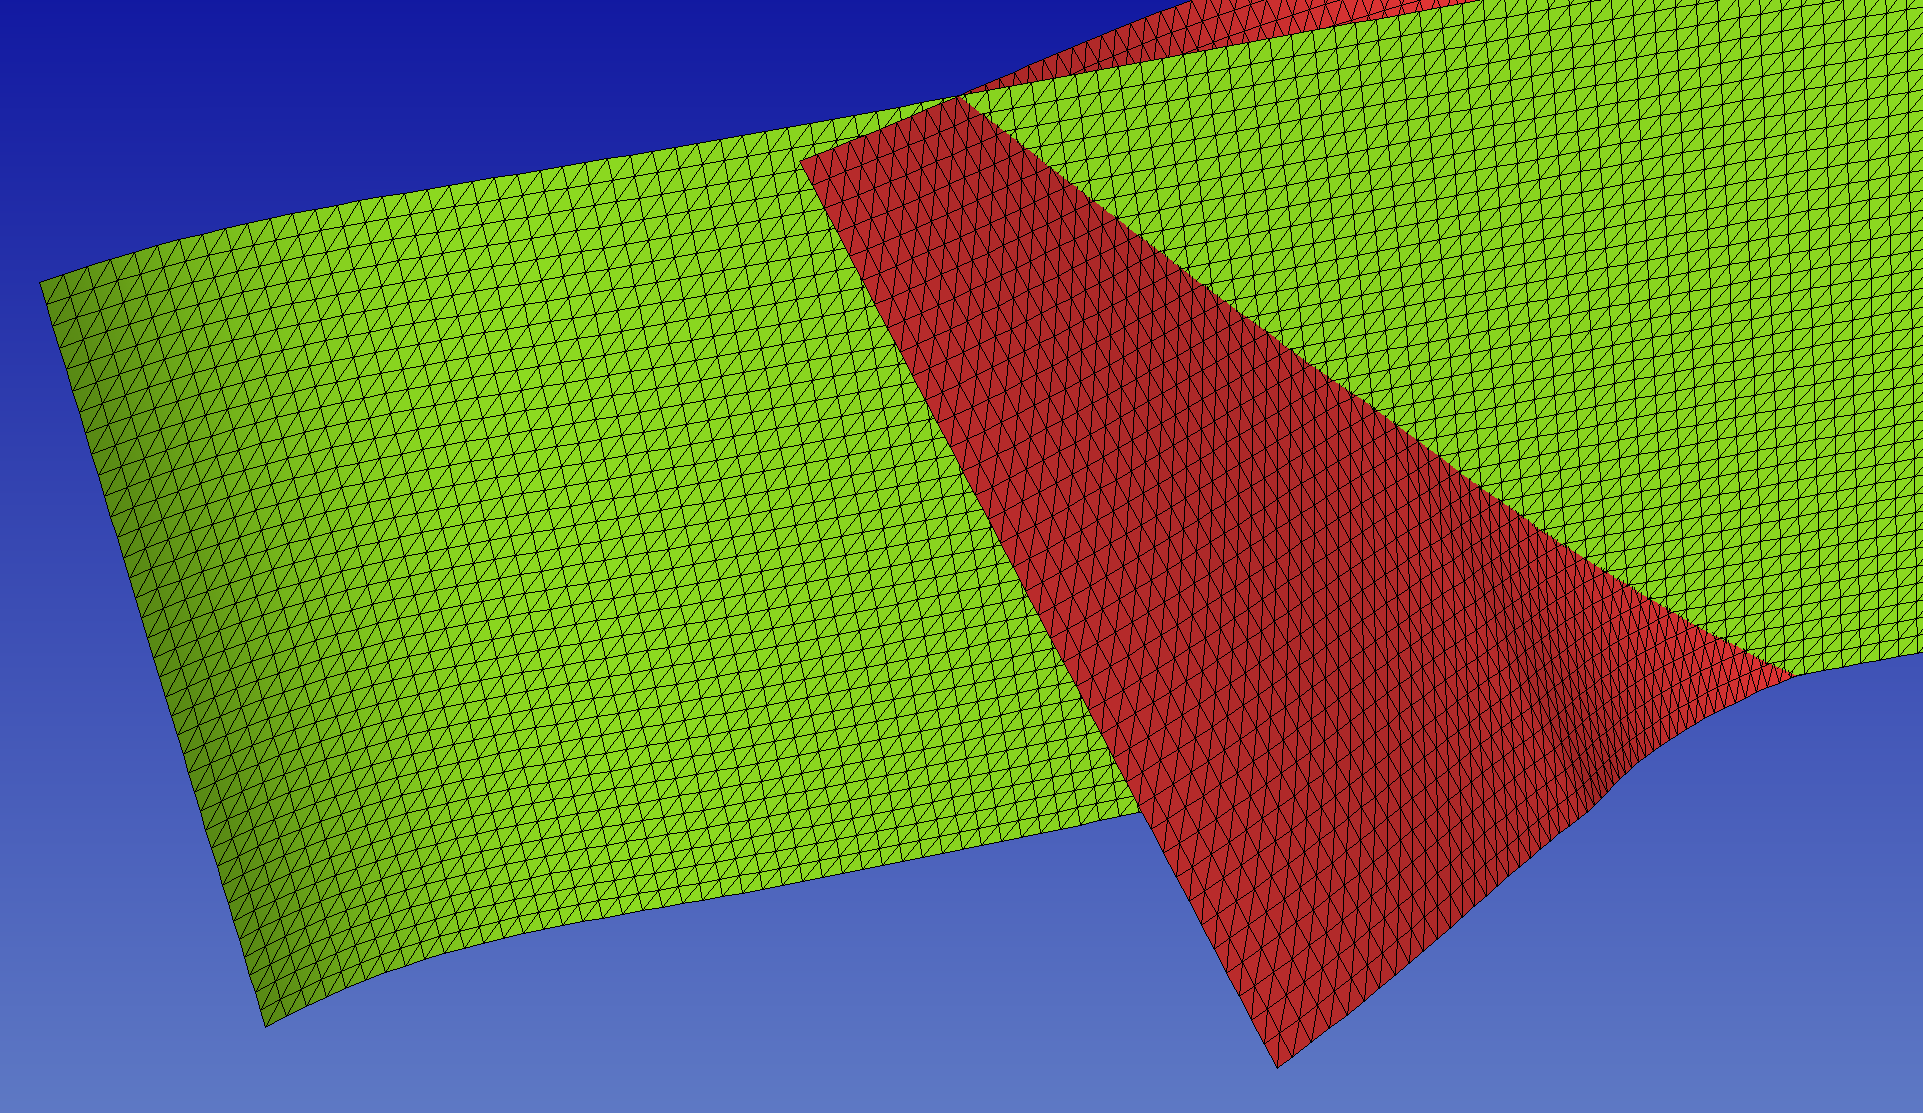 Imported mesh representation of faults without explicitly meshed intersection.